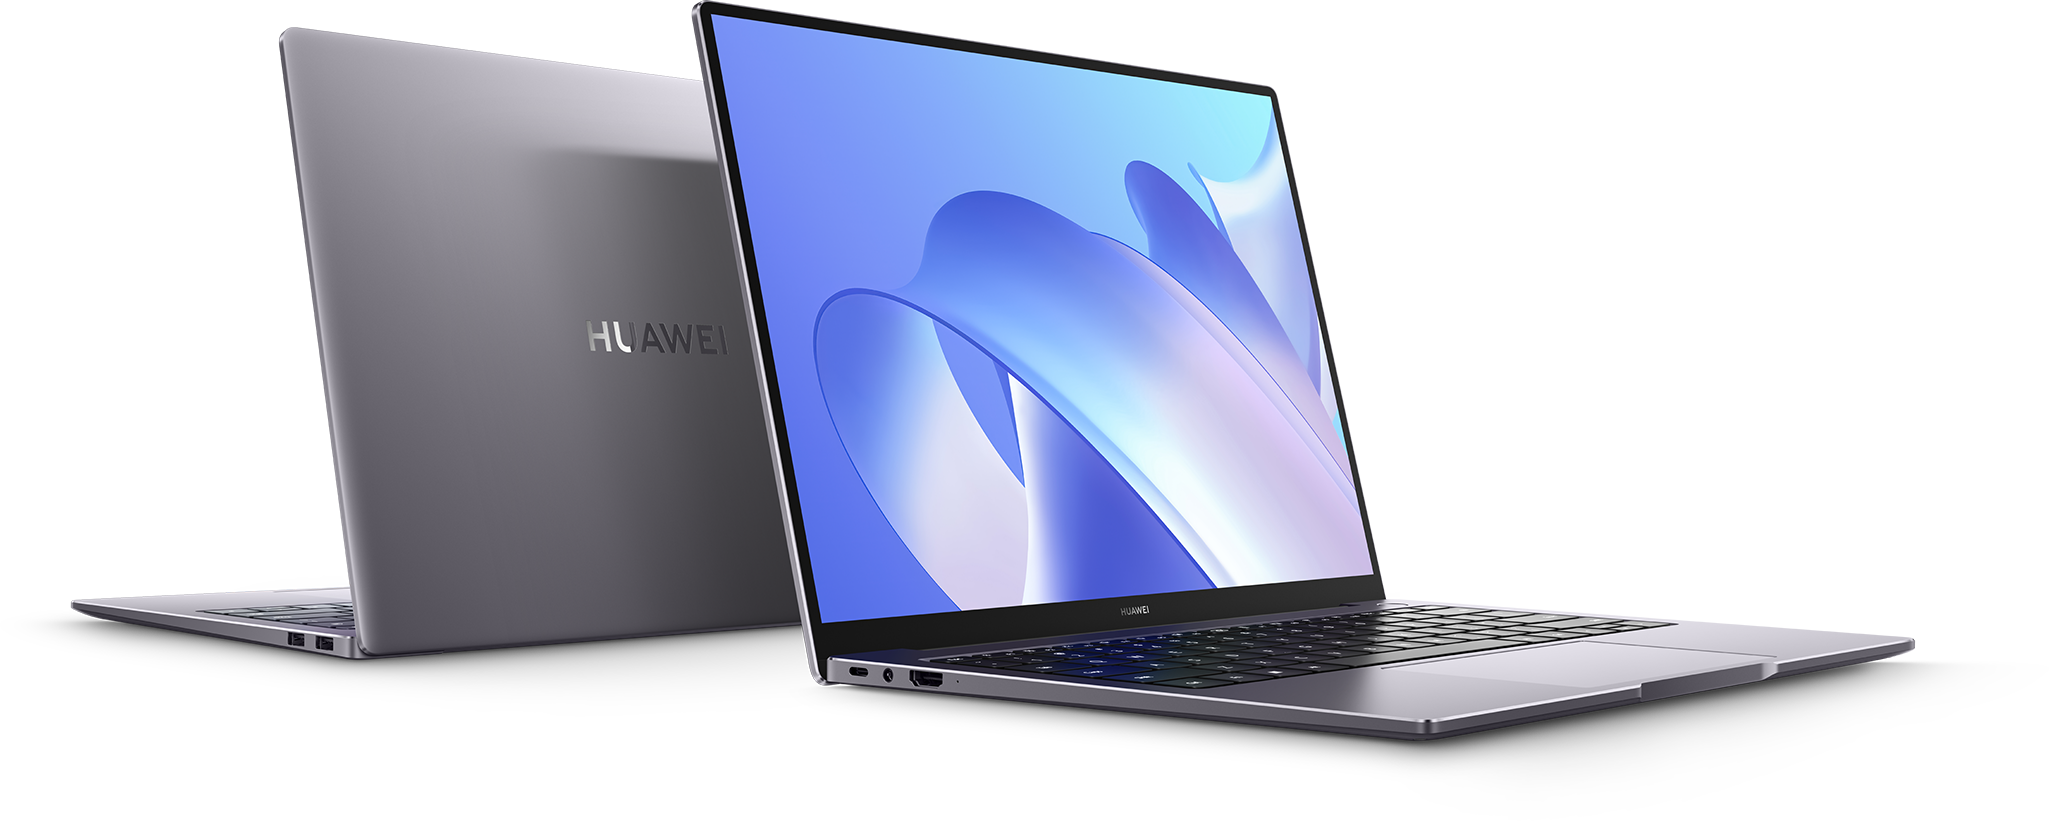 https://consumer.huawei.com/content/dam/huawei-cbg-site/common/mkt/pdp/pc/matebook-14-2023/img/additions/huawei-matebook-14-2023-kv.png